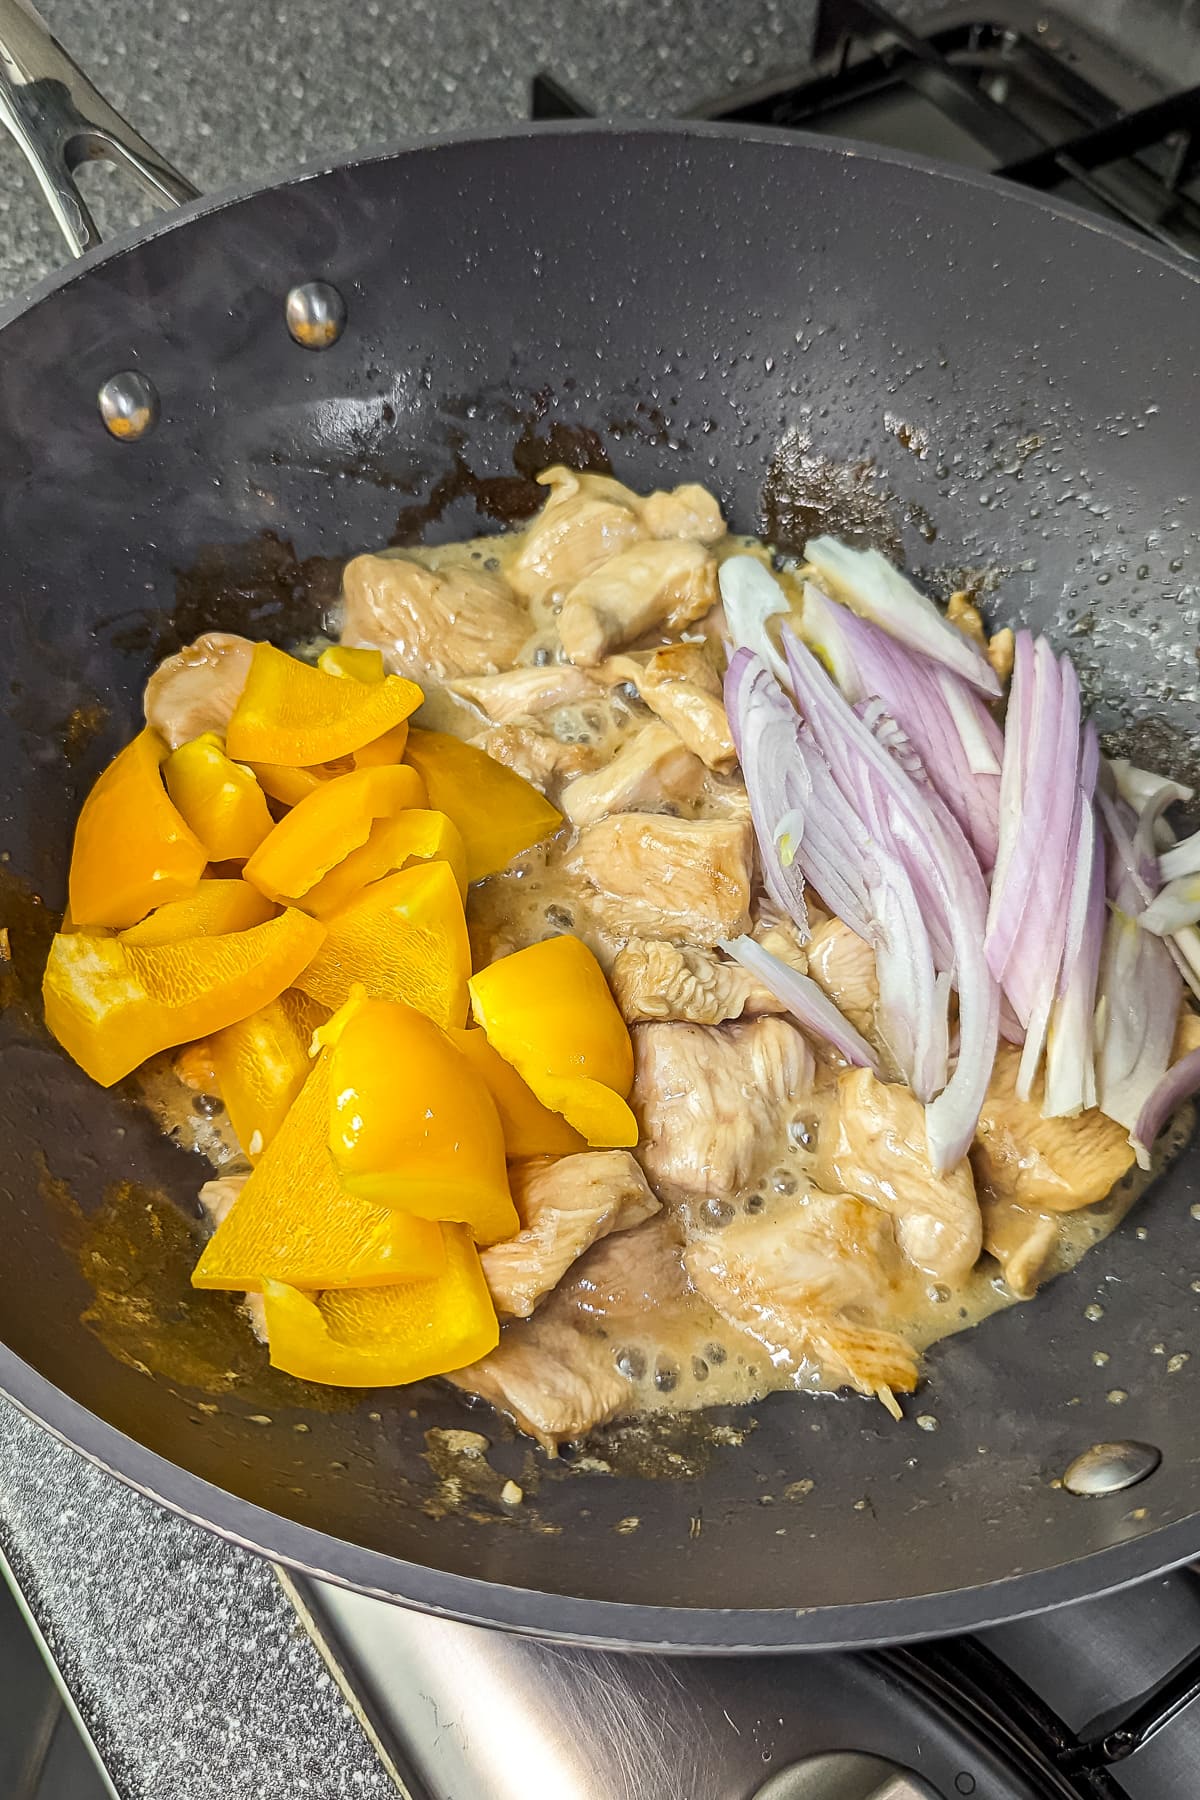 The cooked chicken being tossed with yellow bell pepper strips and red onion in the pan.